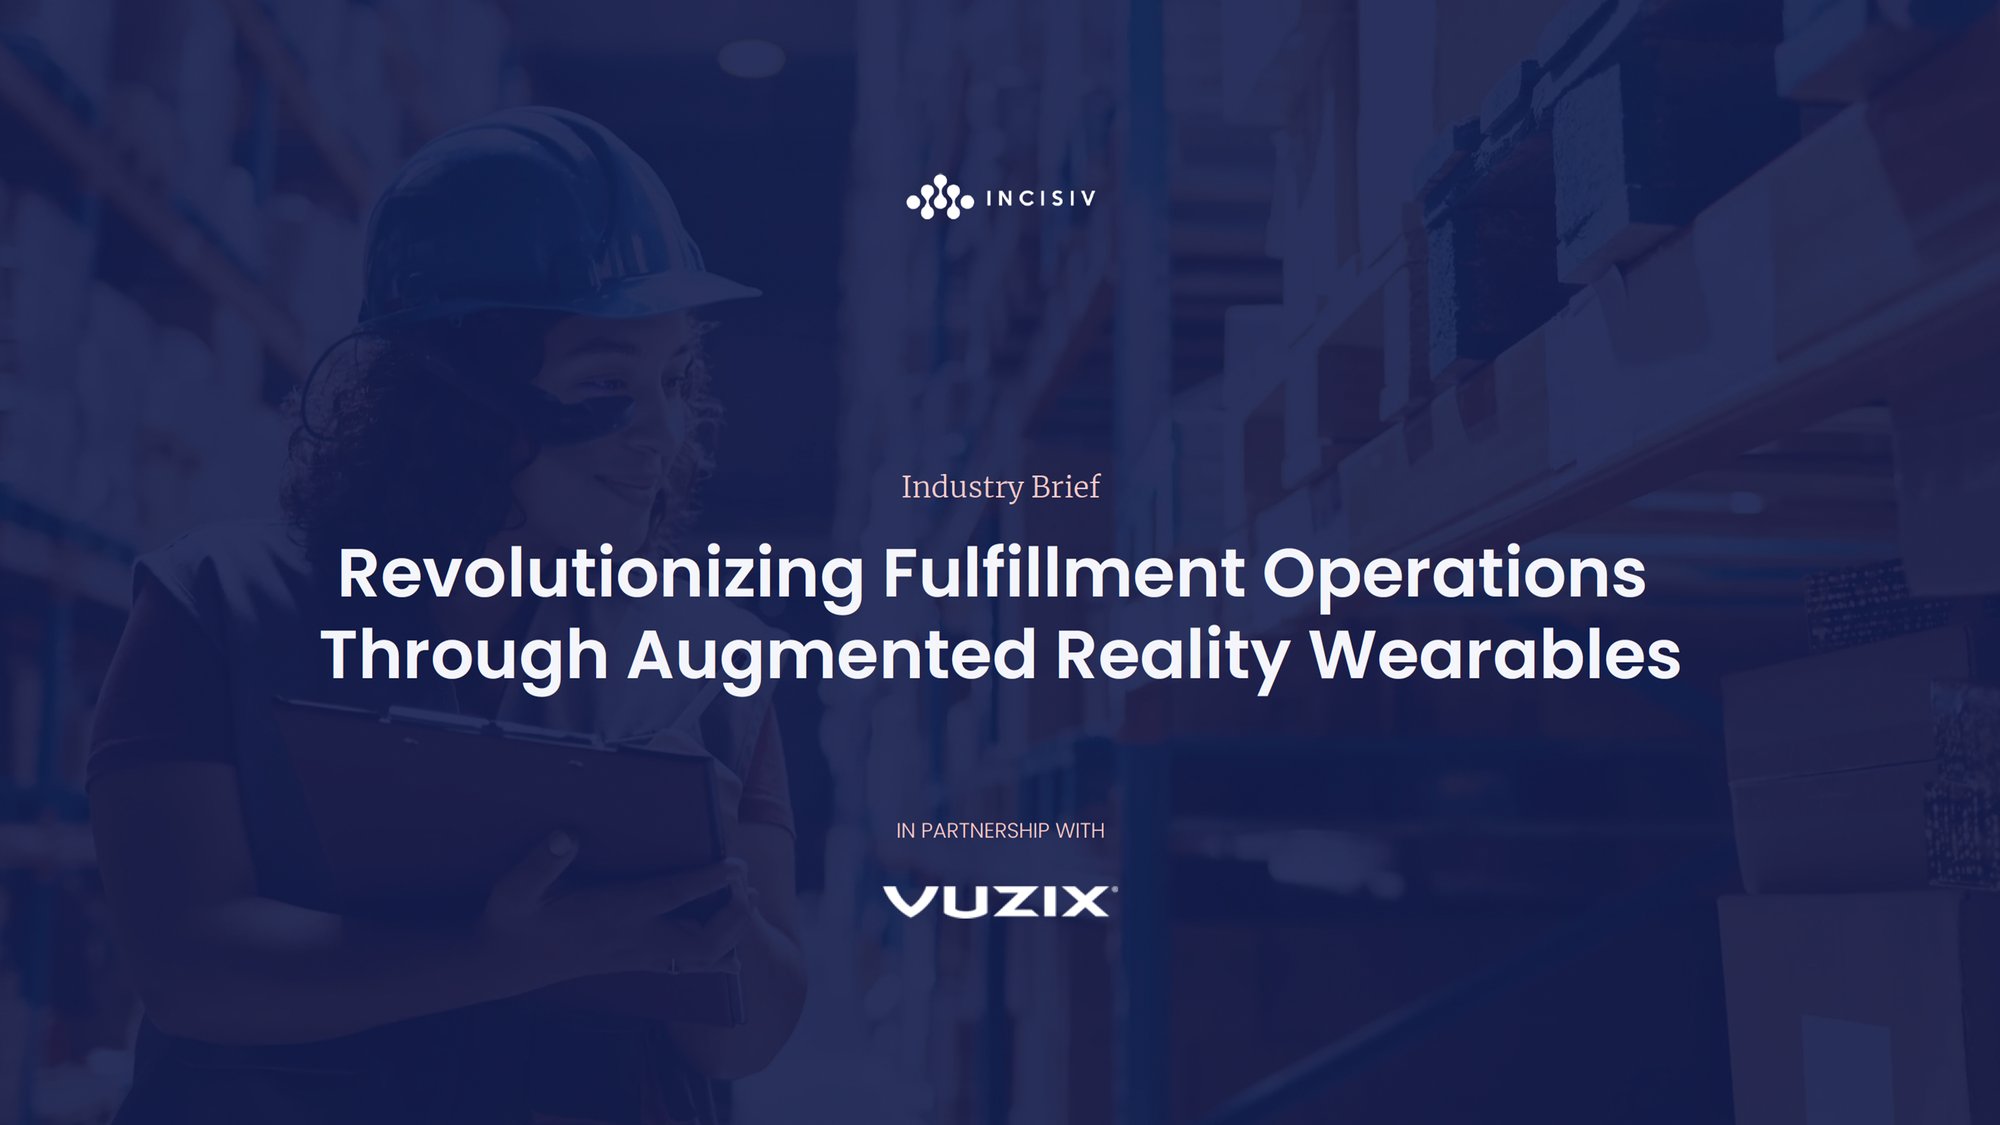 Revolutionizing Fulfillment Operations Through Augmented Reality Wearables